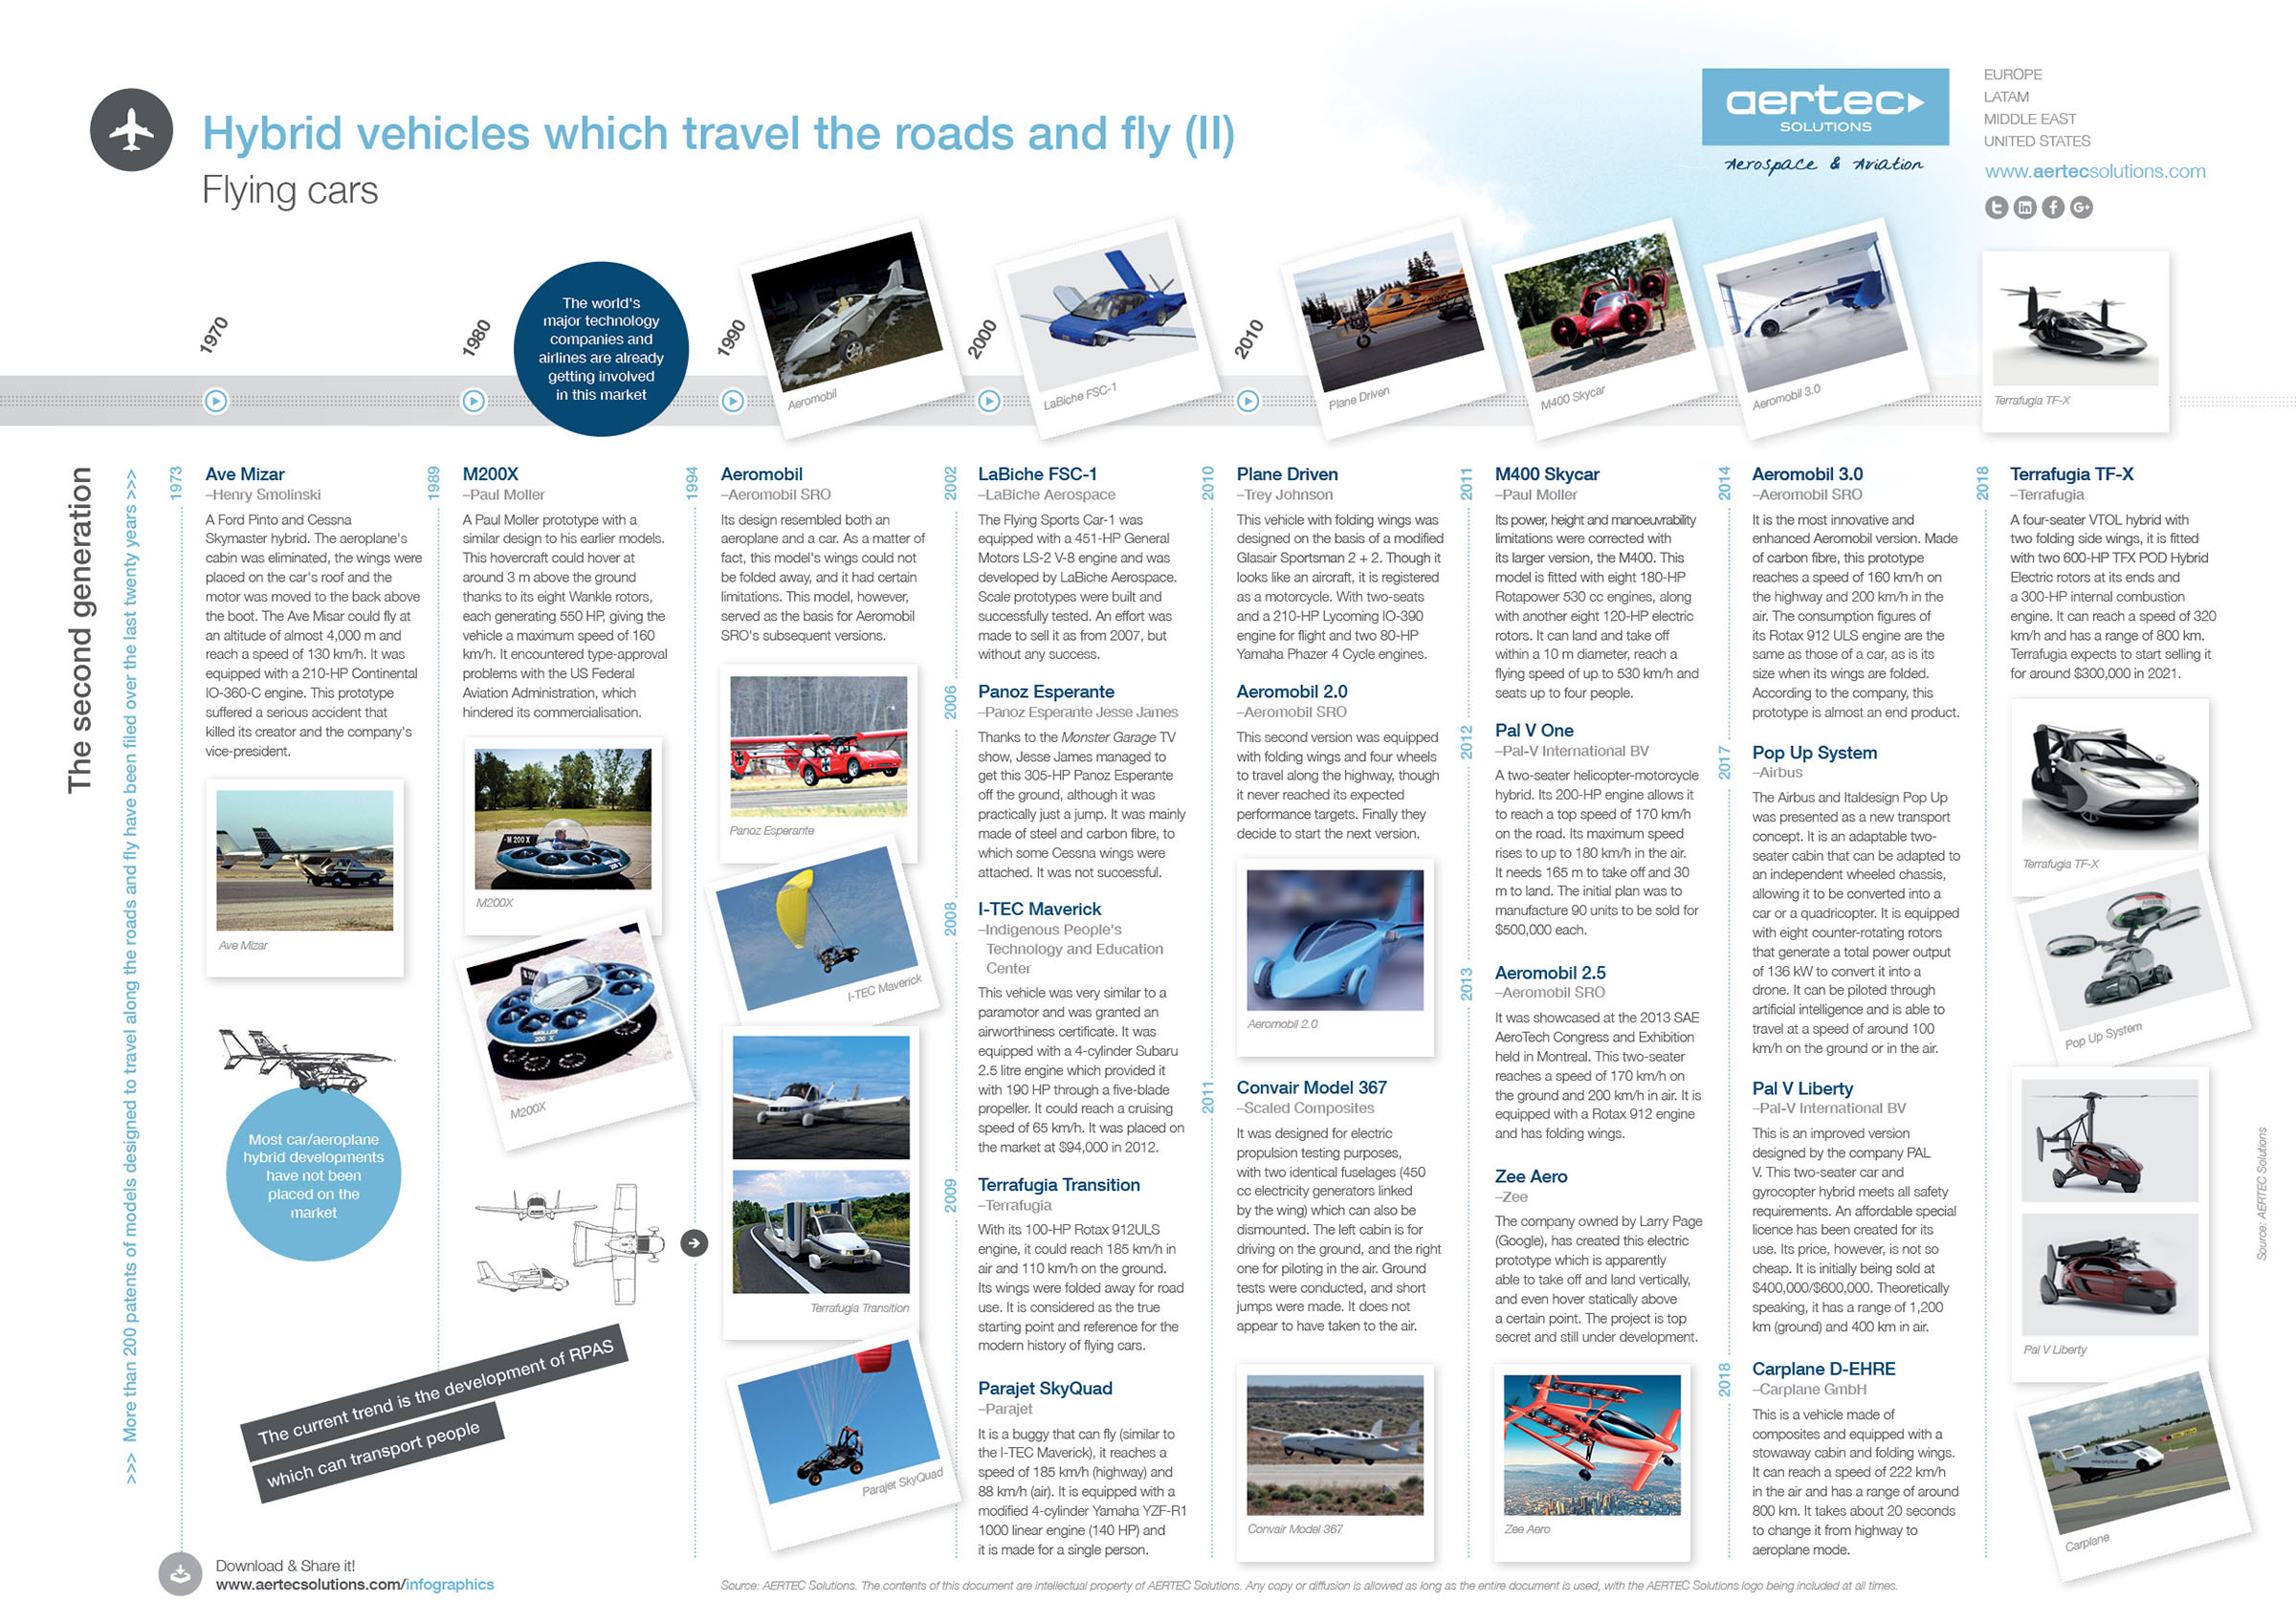 Vehicles which fly and travel the roads